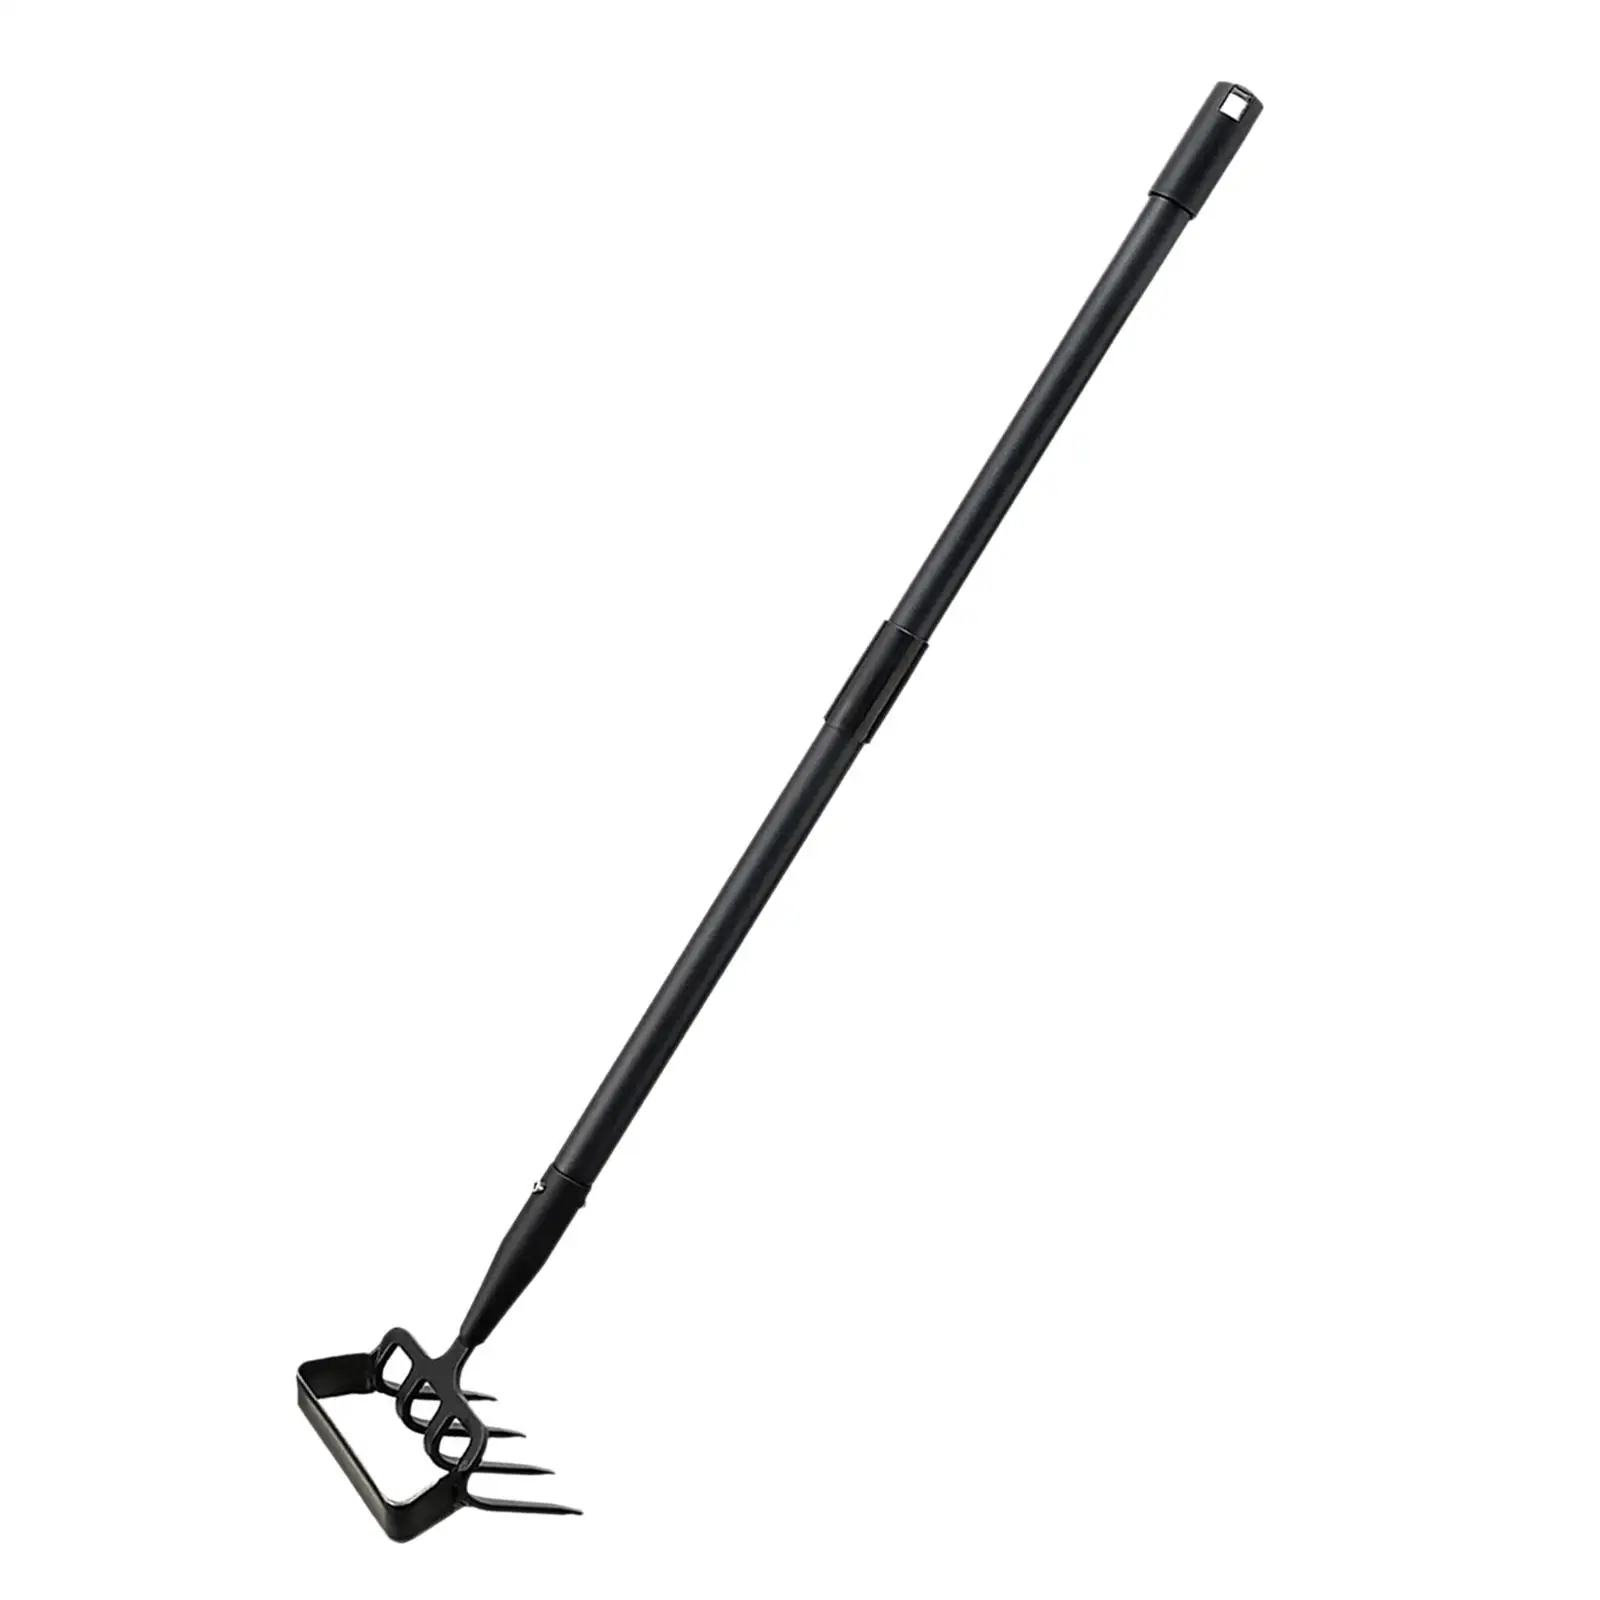 Garden Weeder Hand Tool 2 in 1 Heavy Duty Stirrup Hoe and Cultivator Metal Weeder Puller for Lawn Digging Loosening Cultivating